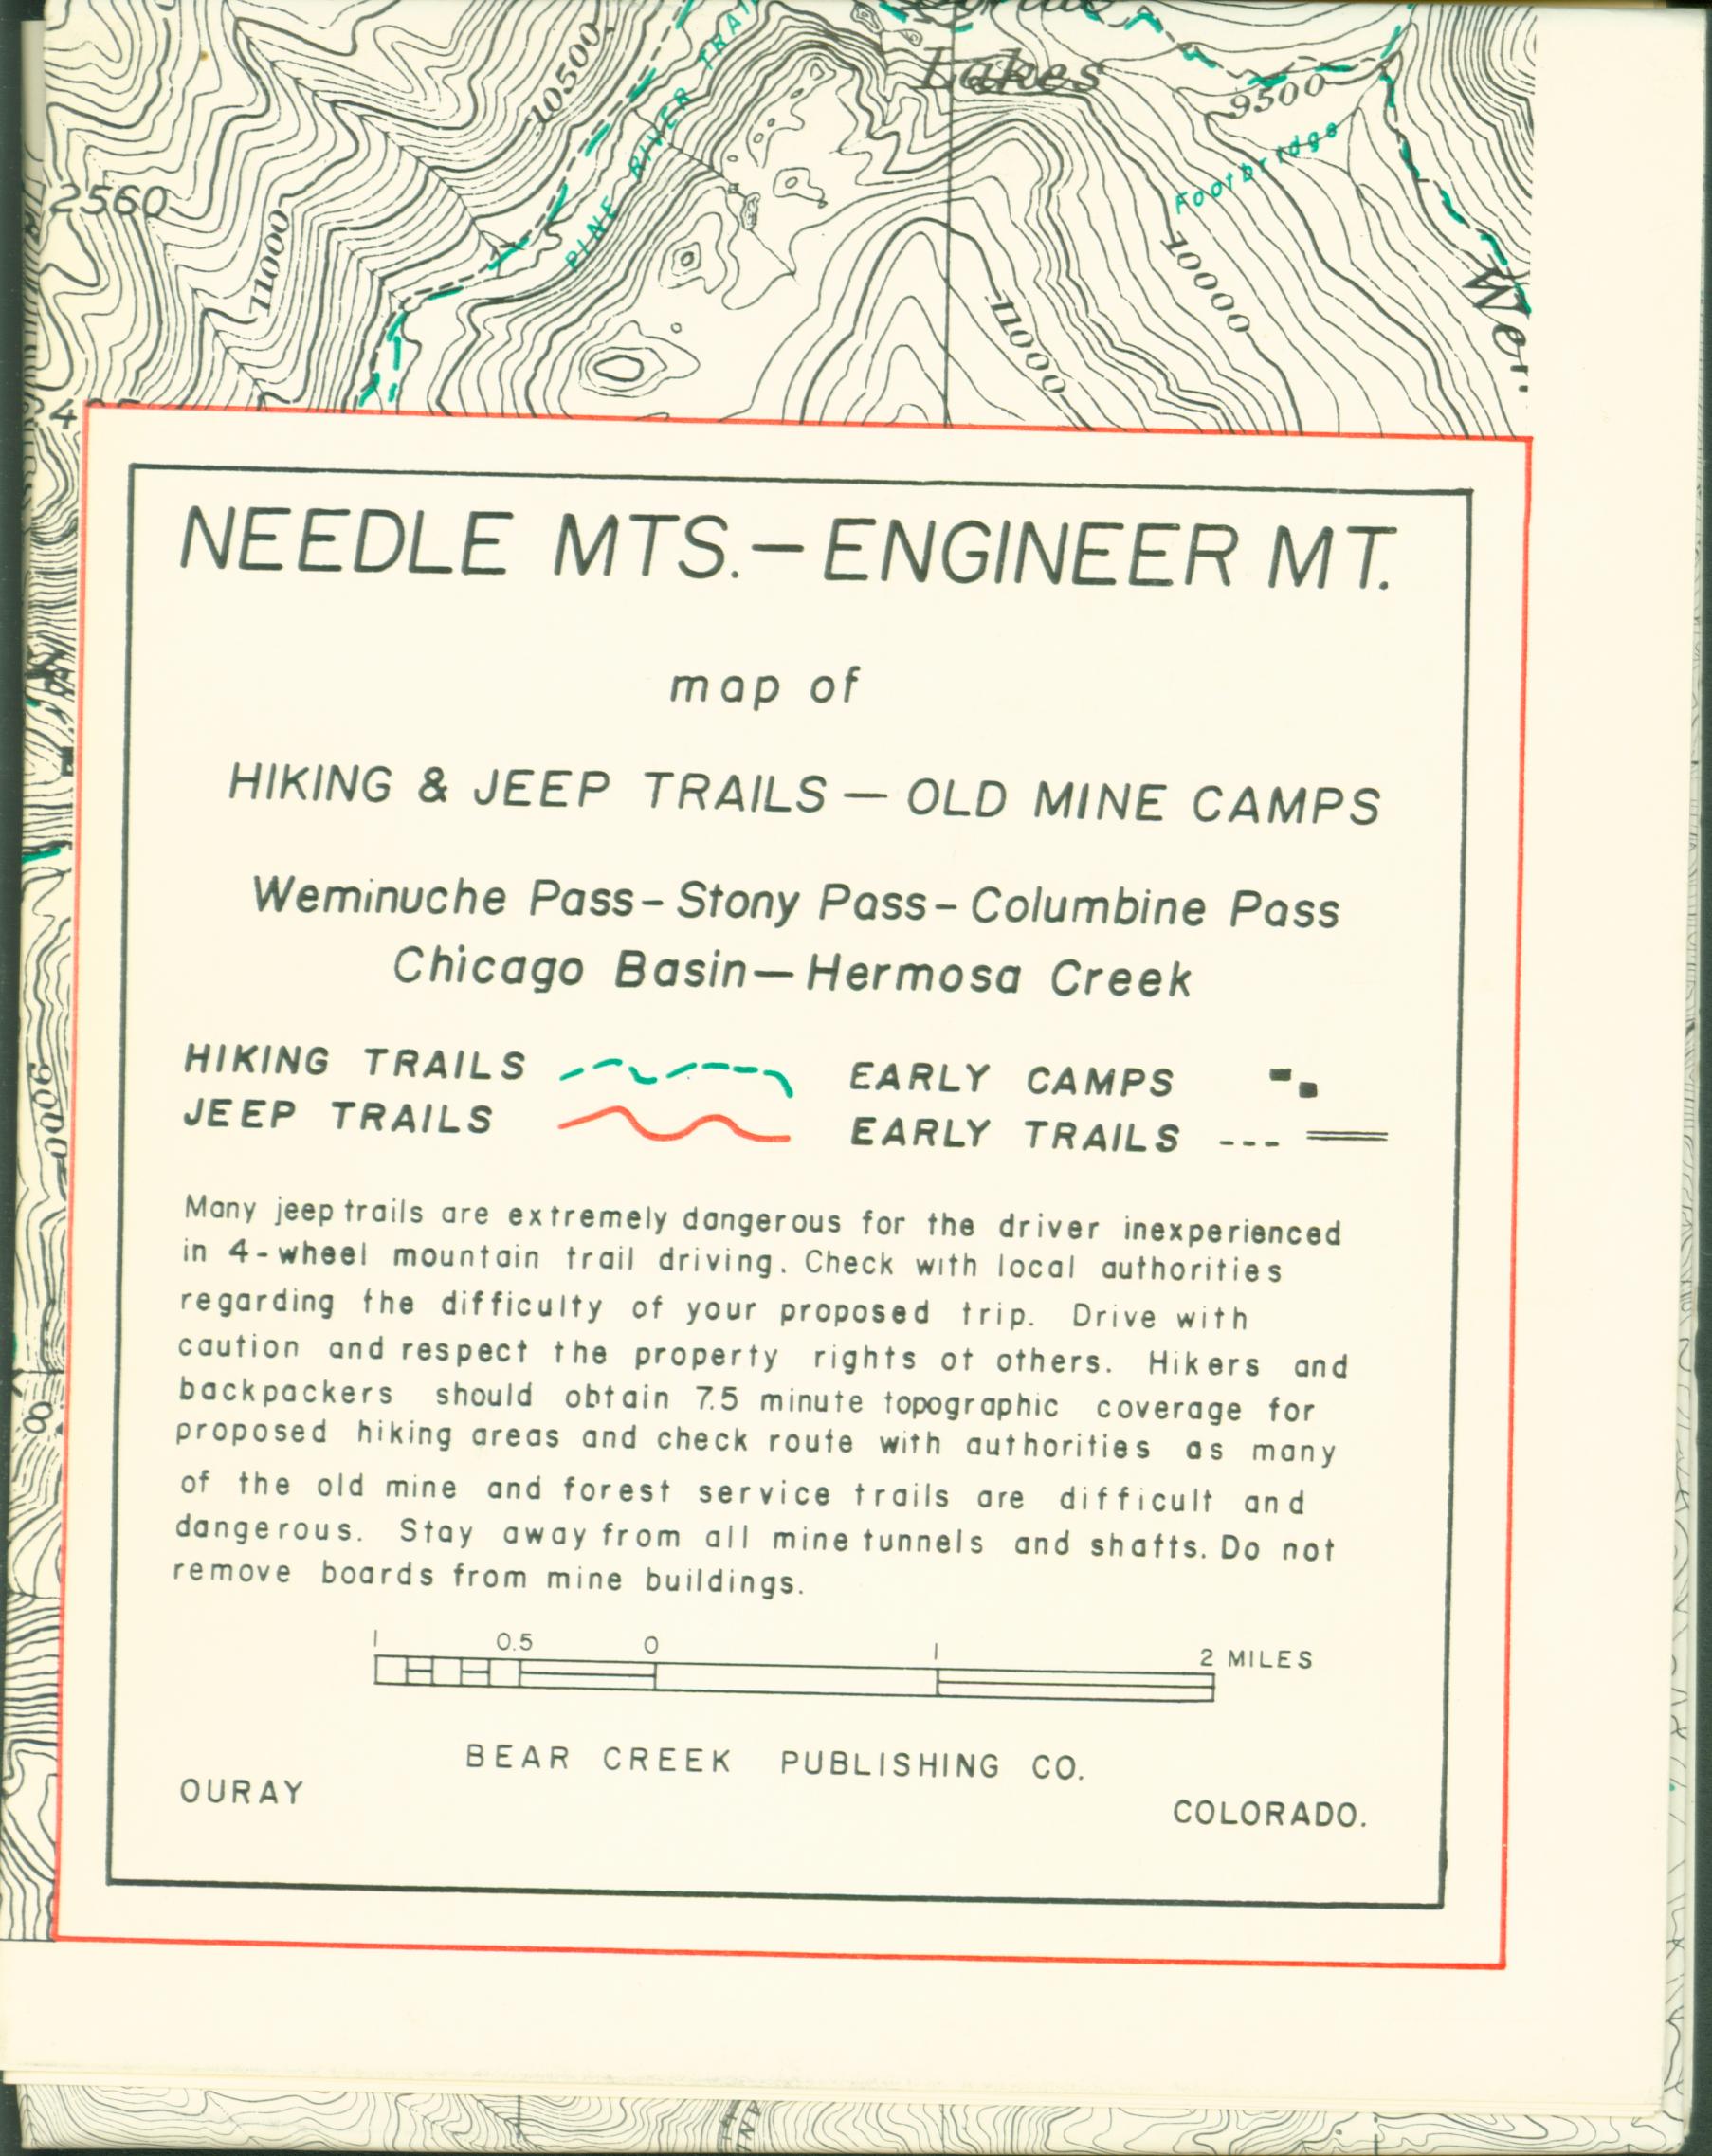 NEEDLE MOUNTAINS/ENGINEER MOUNTAINS map of hiking & jeep trails, old mine camps.